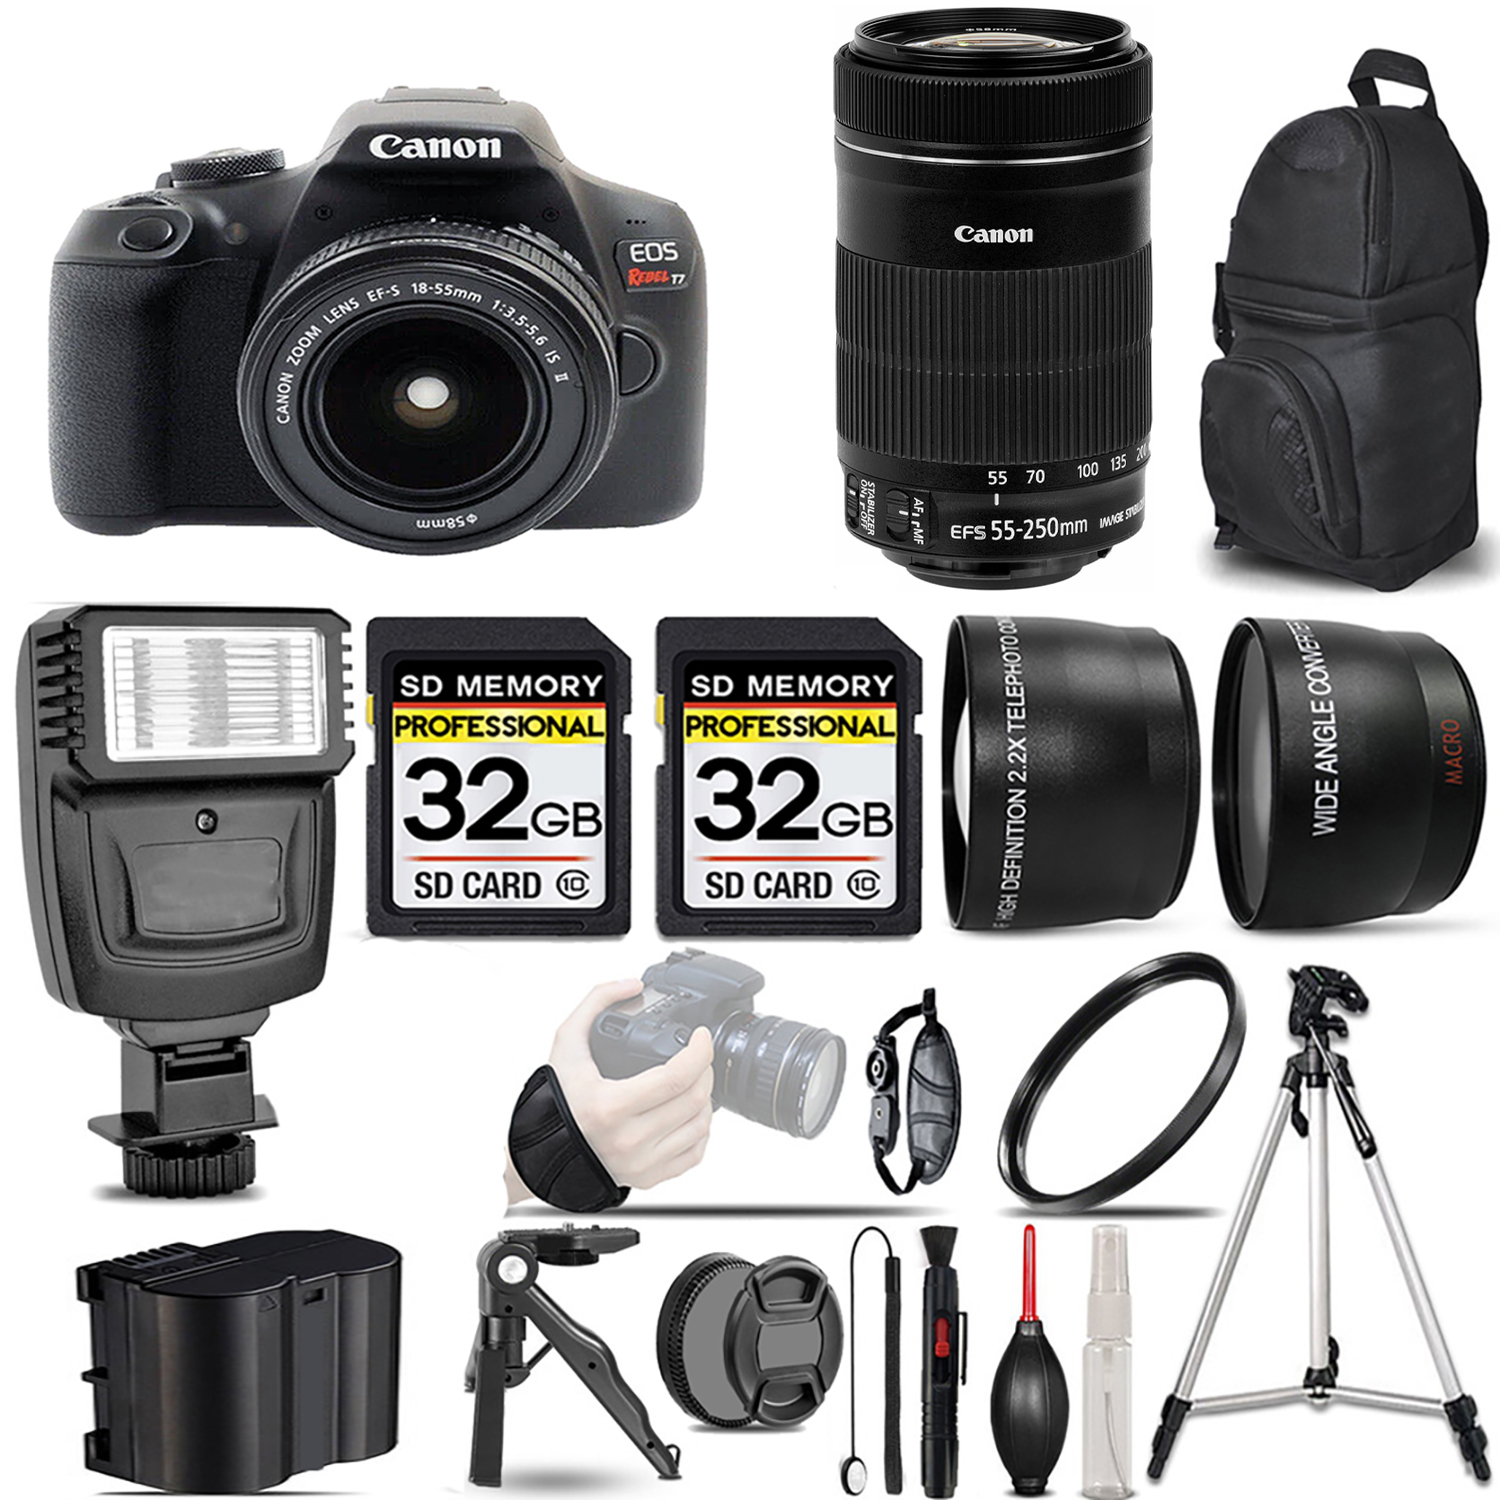 Rebel T7 with 18-55mm Lens + 55-250mm f/4-5.6 IS STM Lens + Flash + 64GB - Kit *FREE SHIPPING*